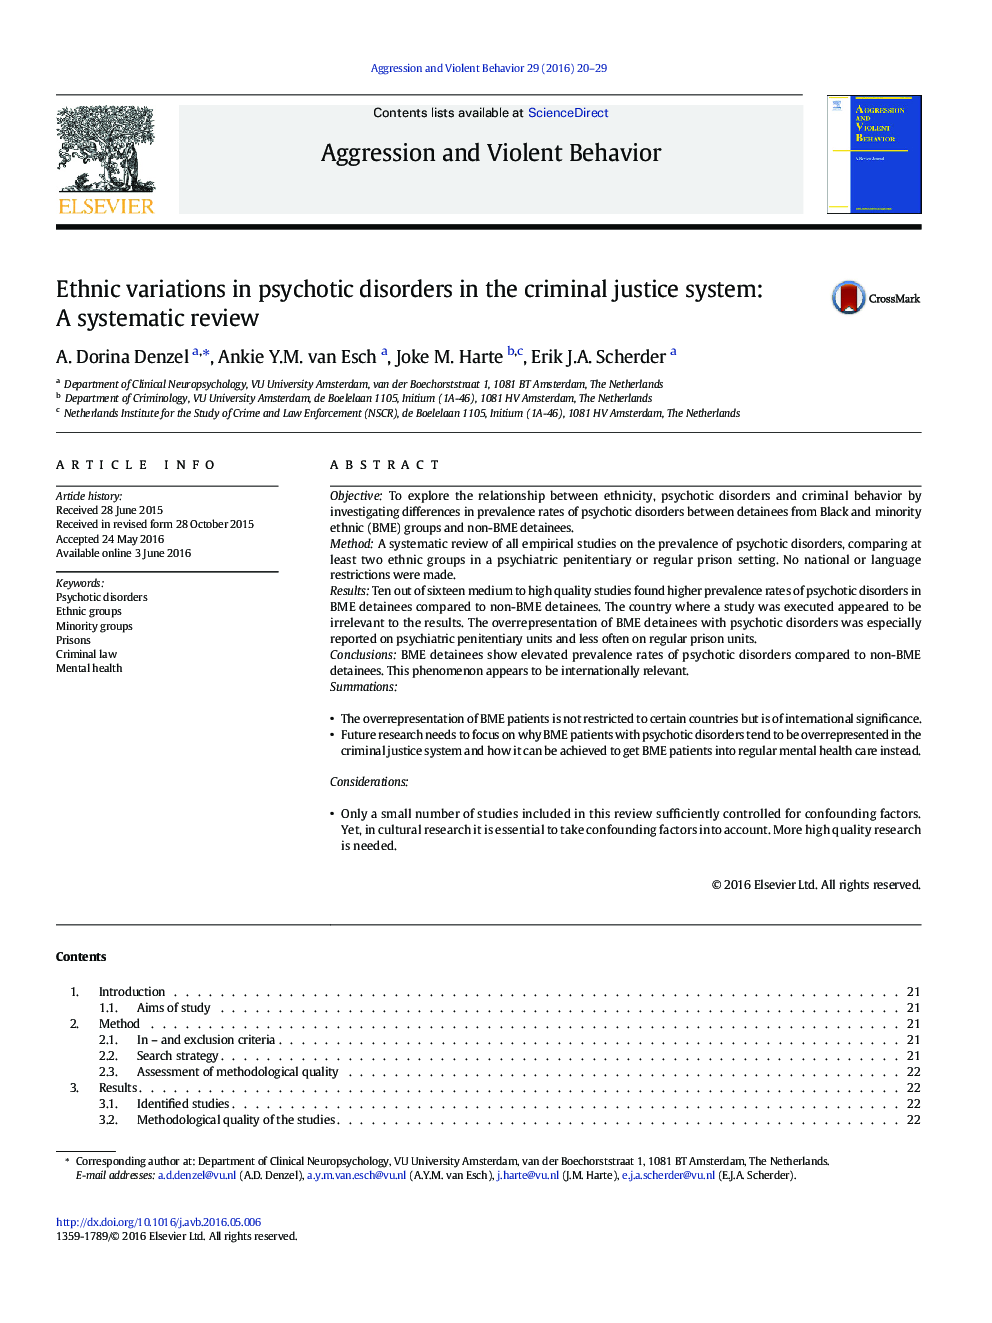 Ethnic variations in psychotic disorders in the criminal justice system: A systematic review